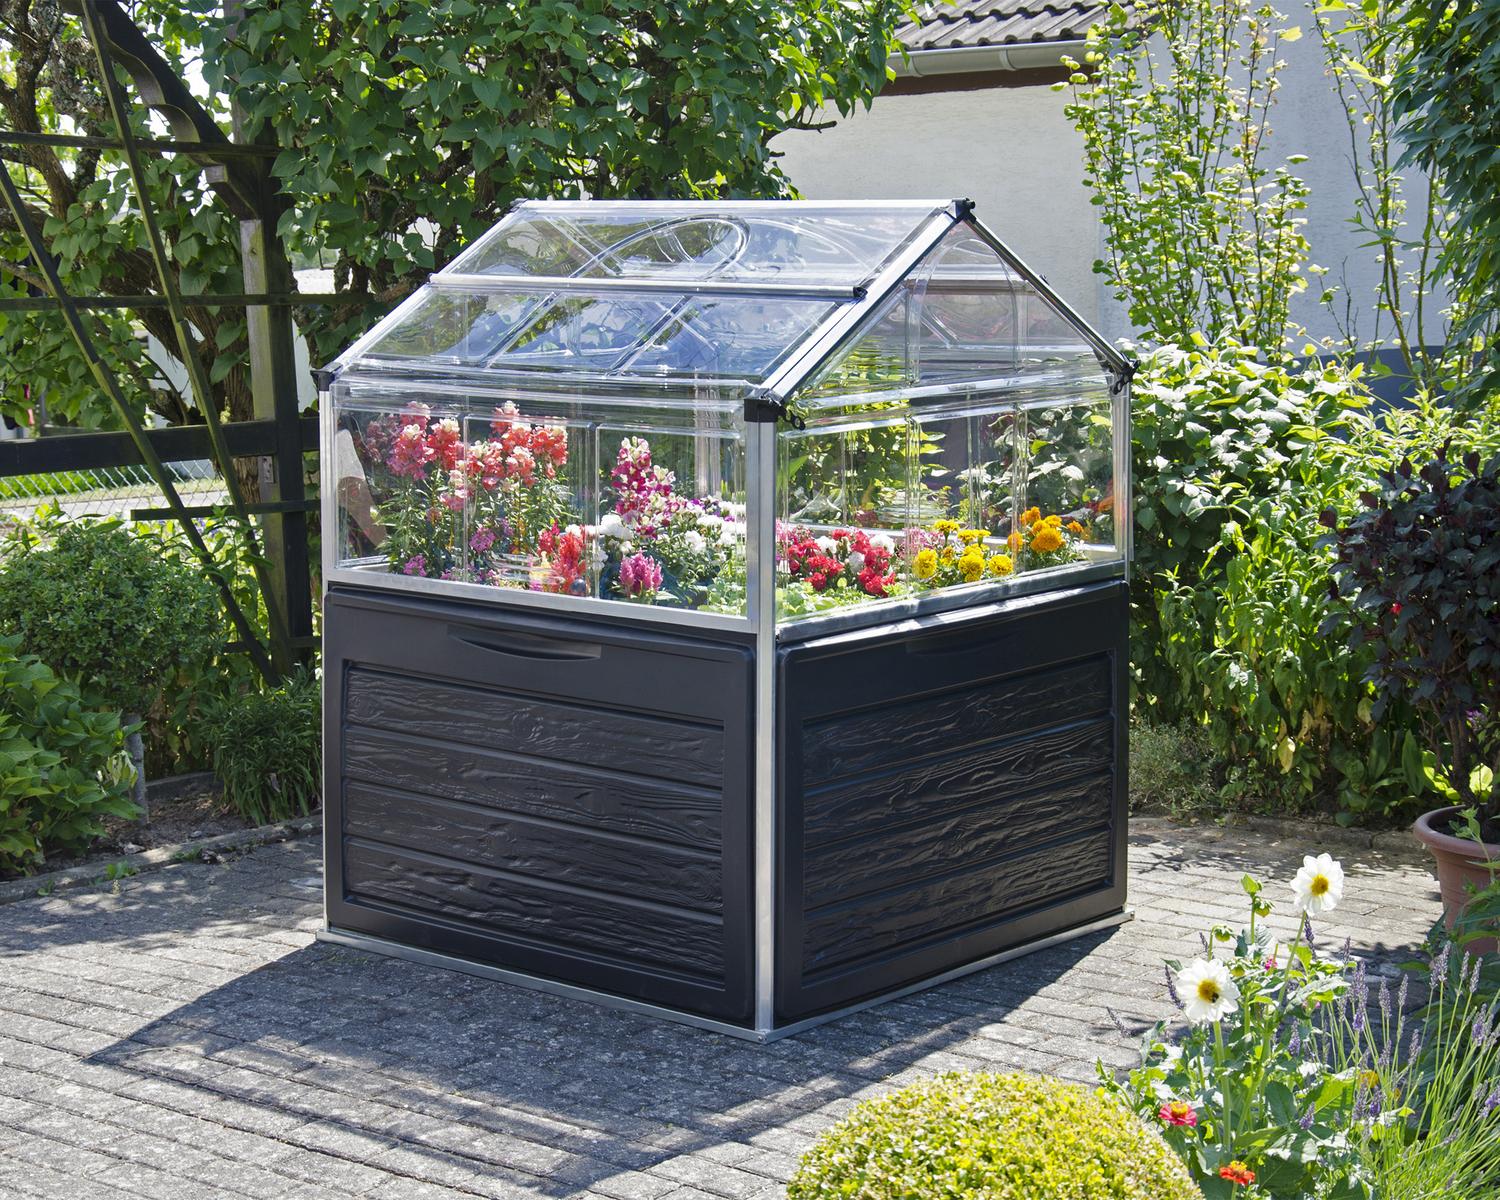 Plant Inn 4' x 4' Greenhouse - Silver Structure & Clear Panels full of flowers